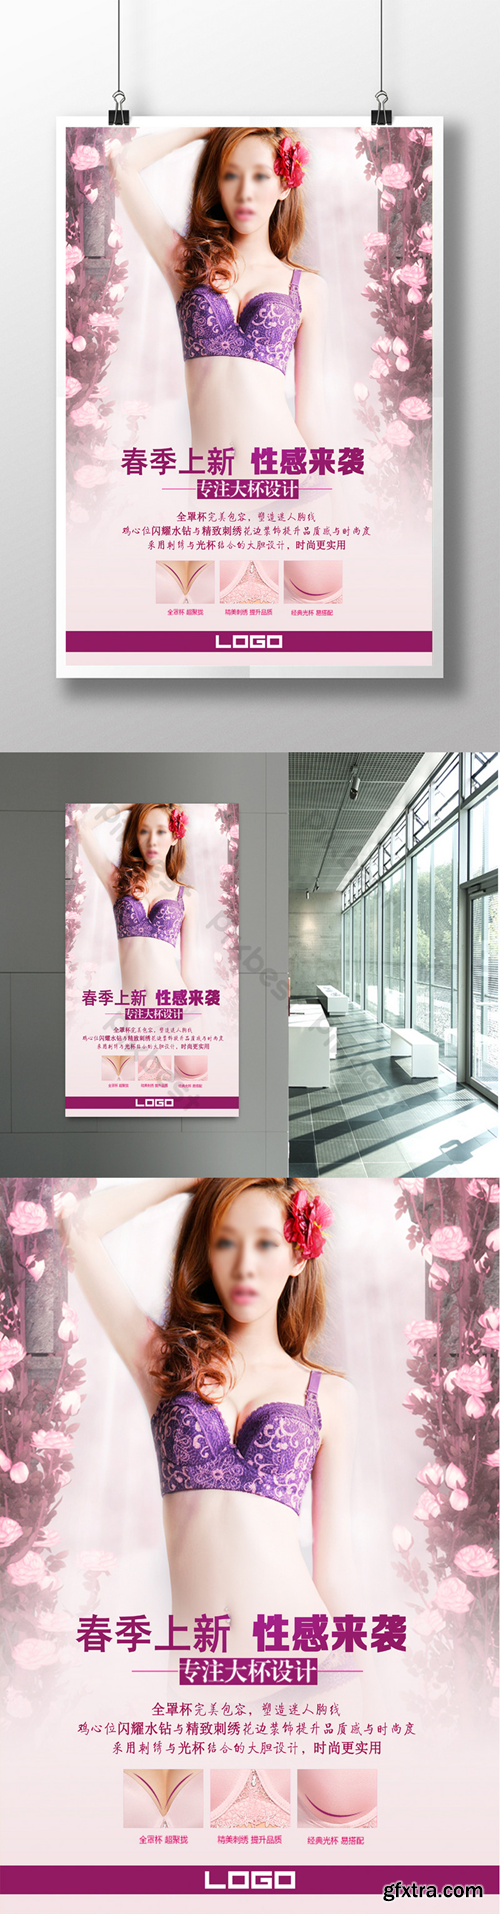 Sexy lingerie promotional poster Template PSD